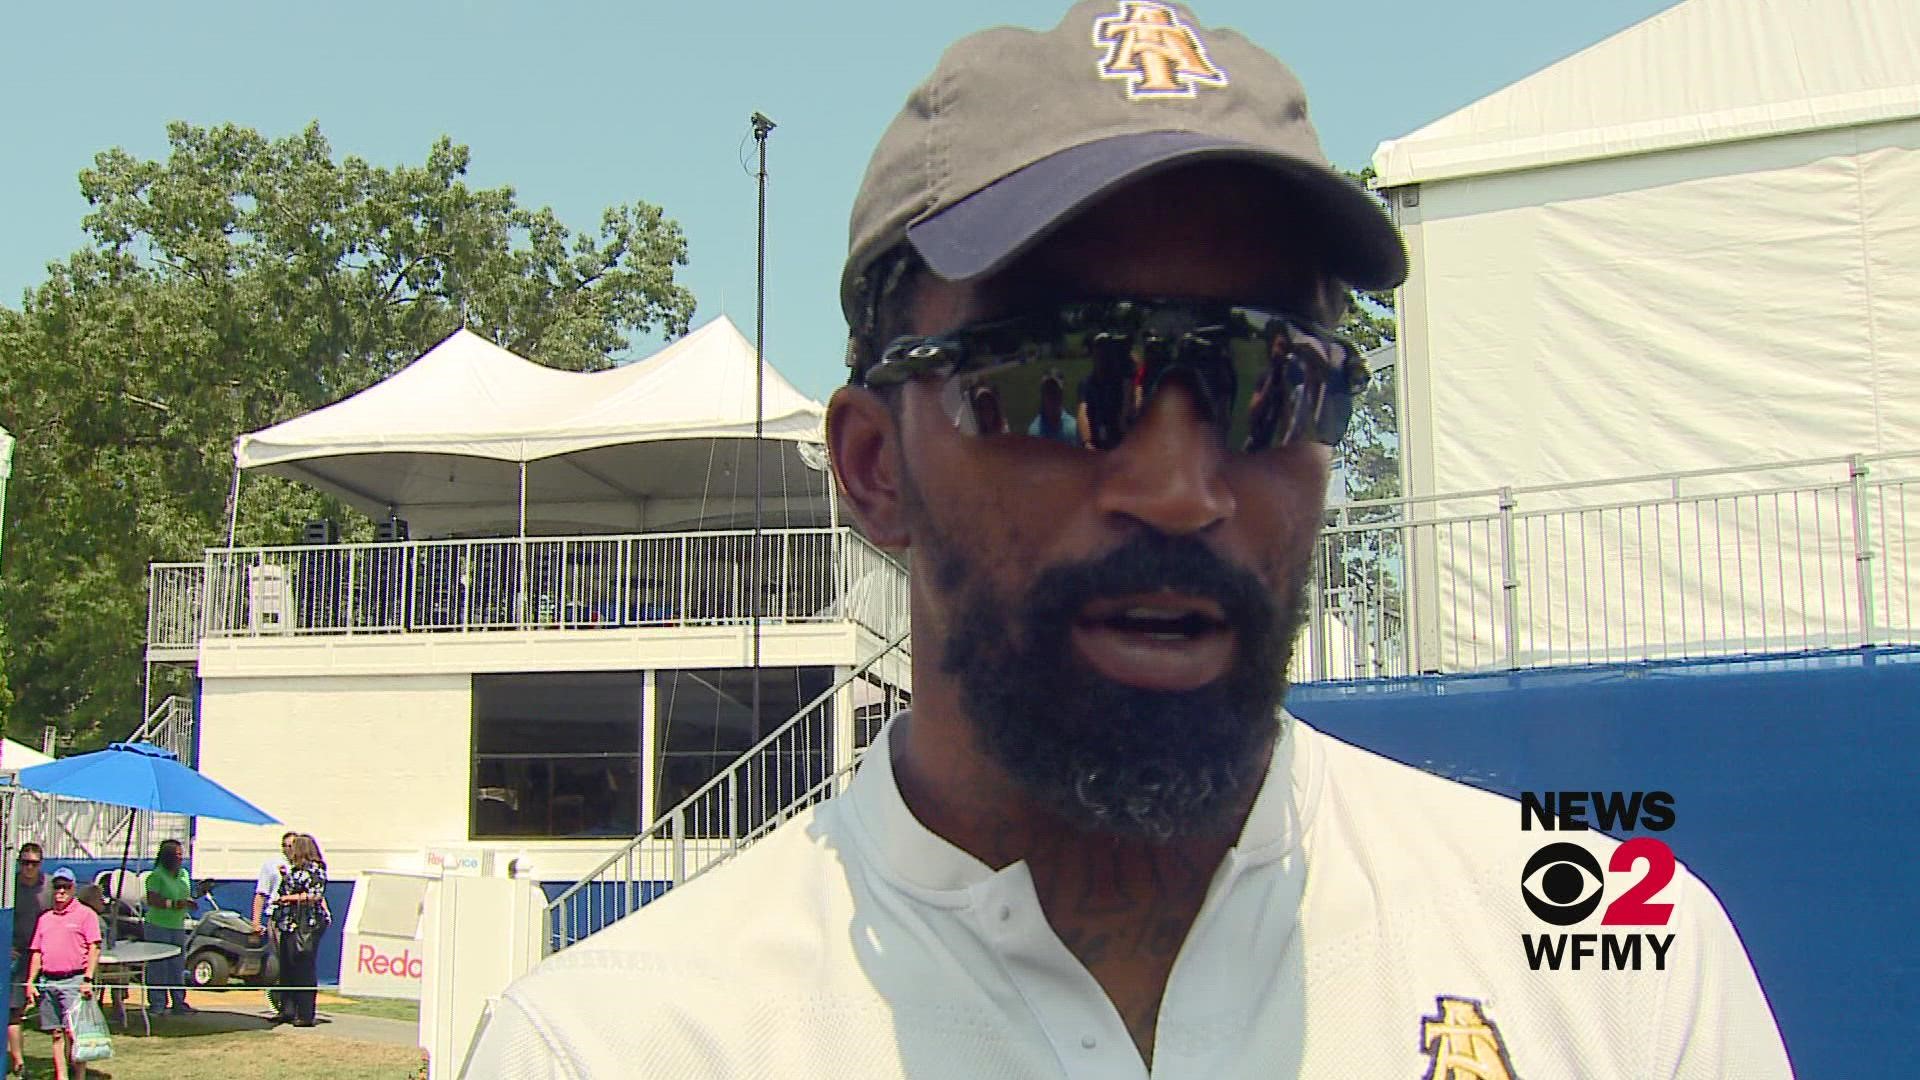 JR Smith talks about golf and NC A&T State University and what's next with his future.